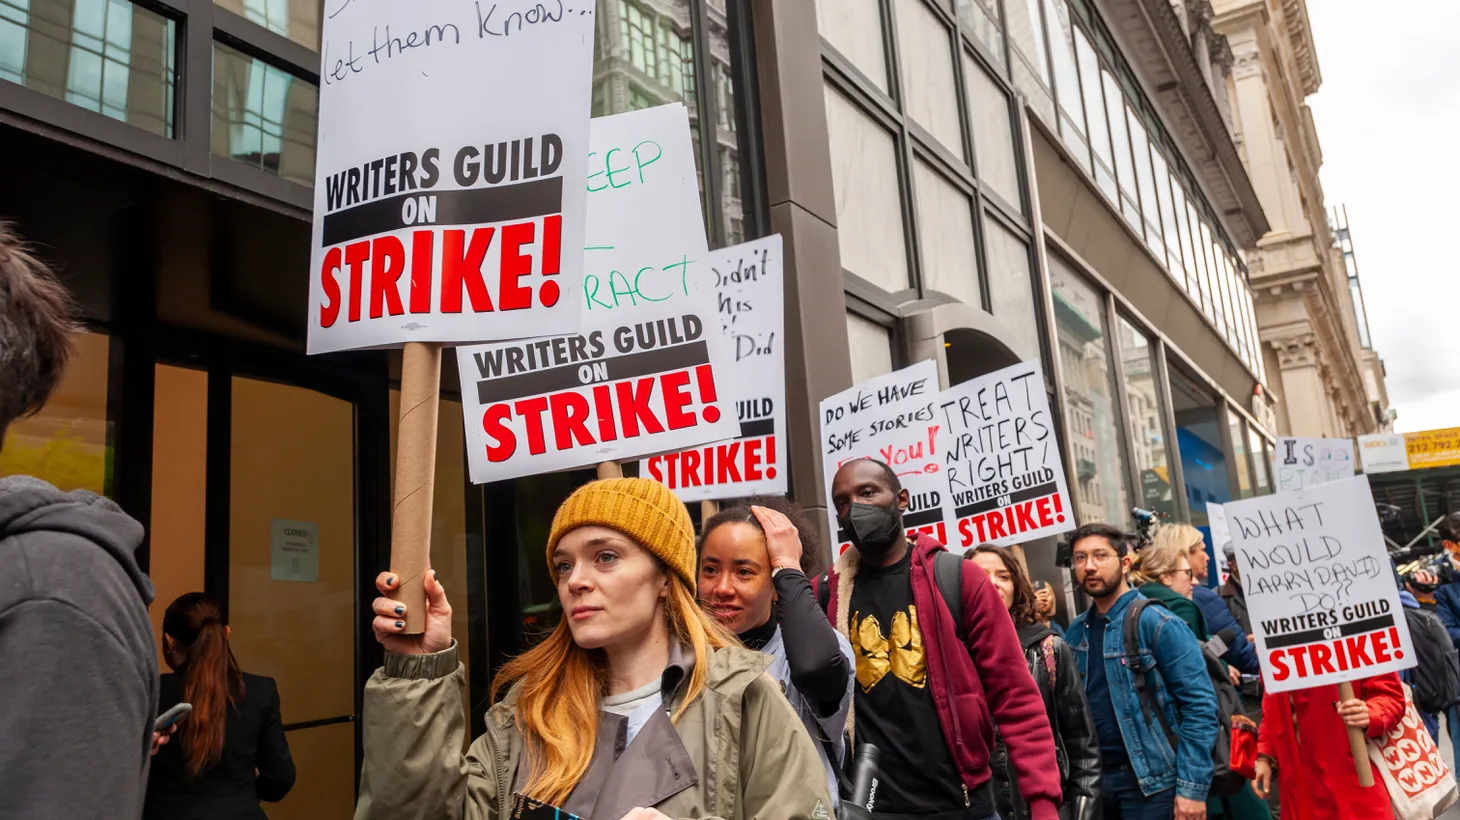 Members of the Writers Guild of America East and their supporters strike outside the Peacock Upfronts on Fifth Avenue in New York on May 2, 2023.